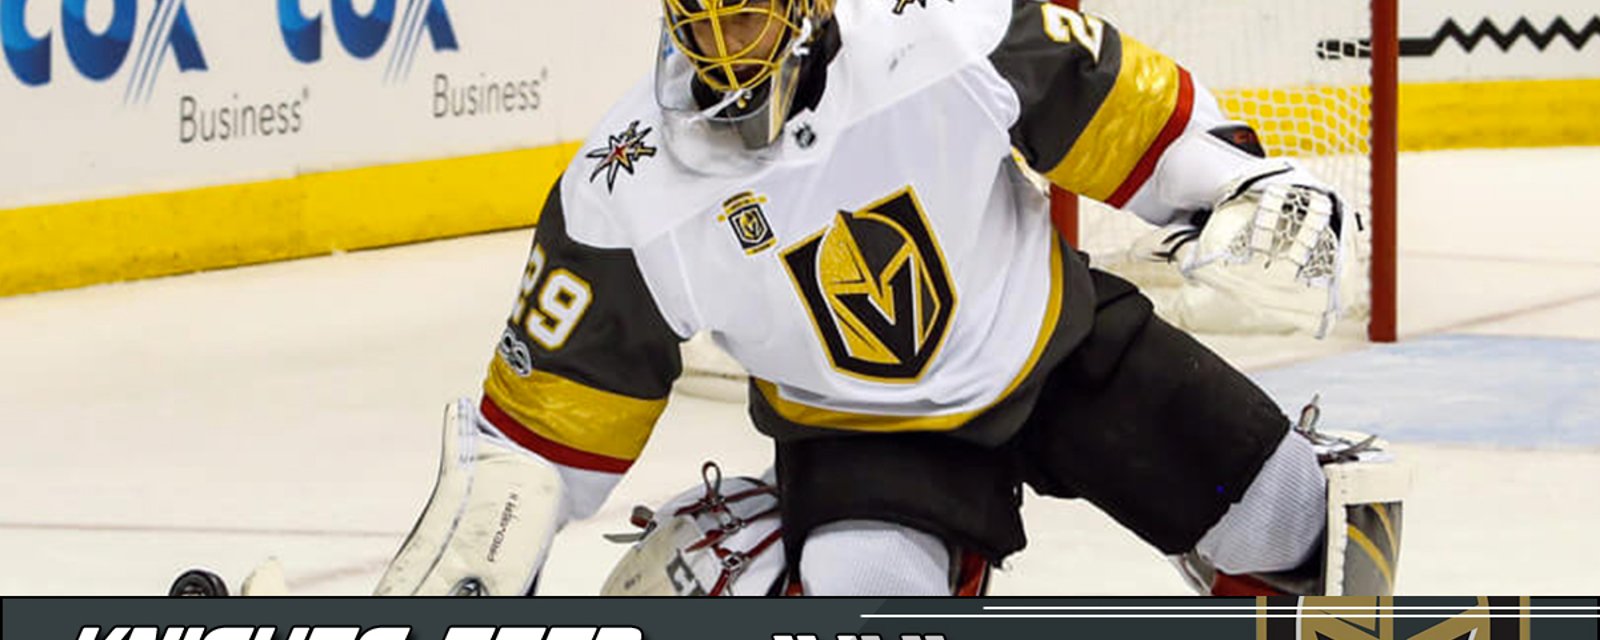 Marc-Andre Fleury reached another impressive milestone last night!